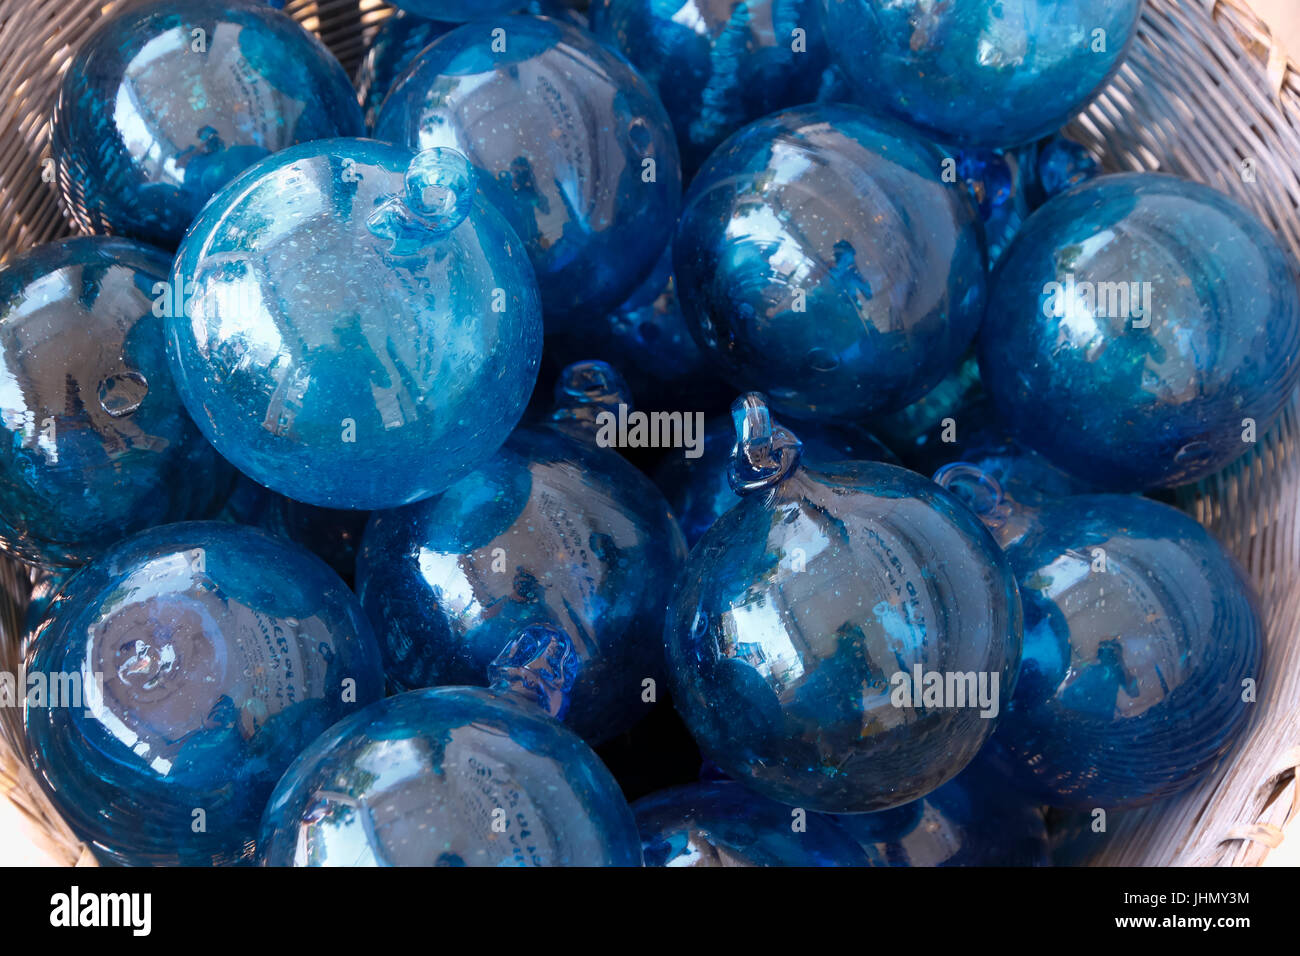 Christmas decorative ornament balls on display in a basket. Stock Photo